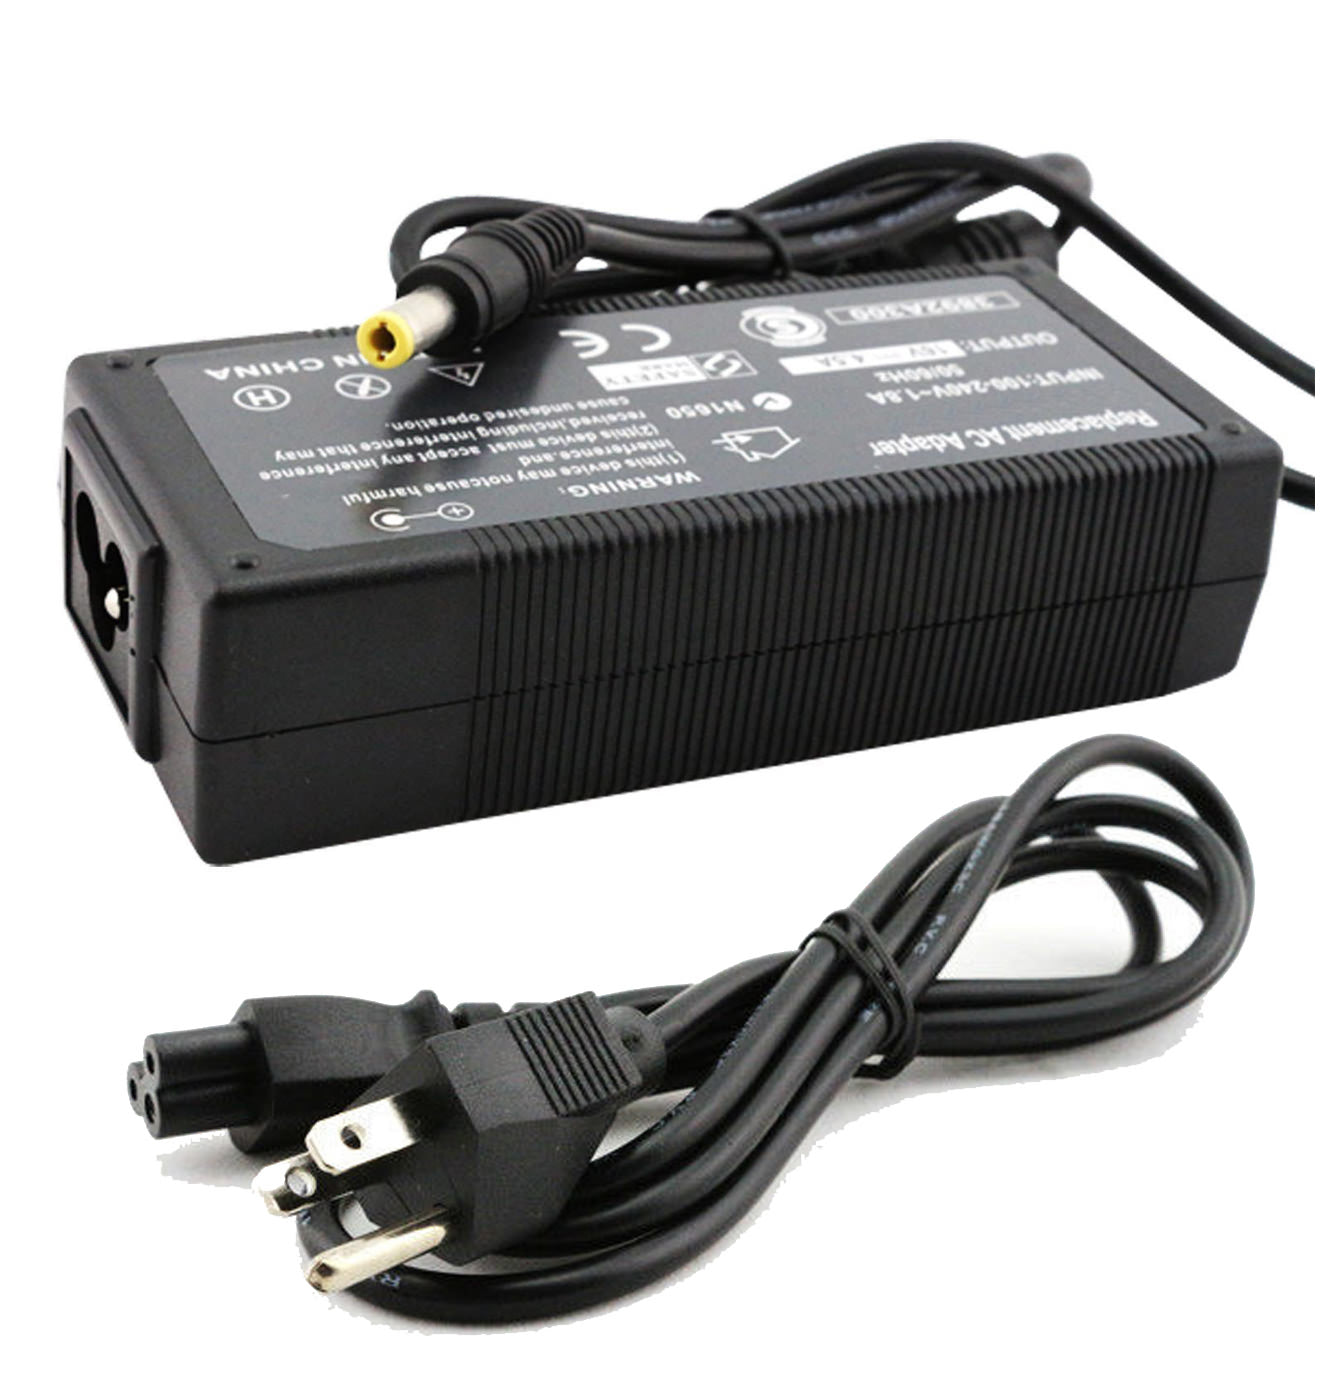 AC Adapter Charger for IBM ThinkPad T40 Notebook.